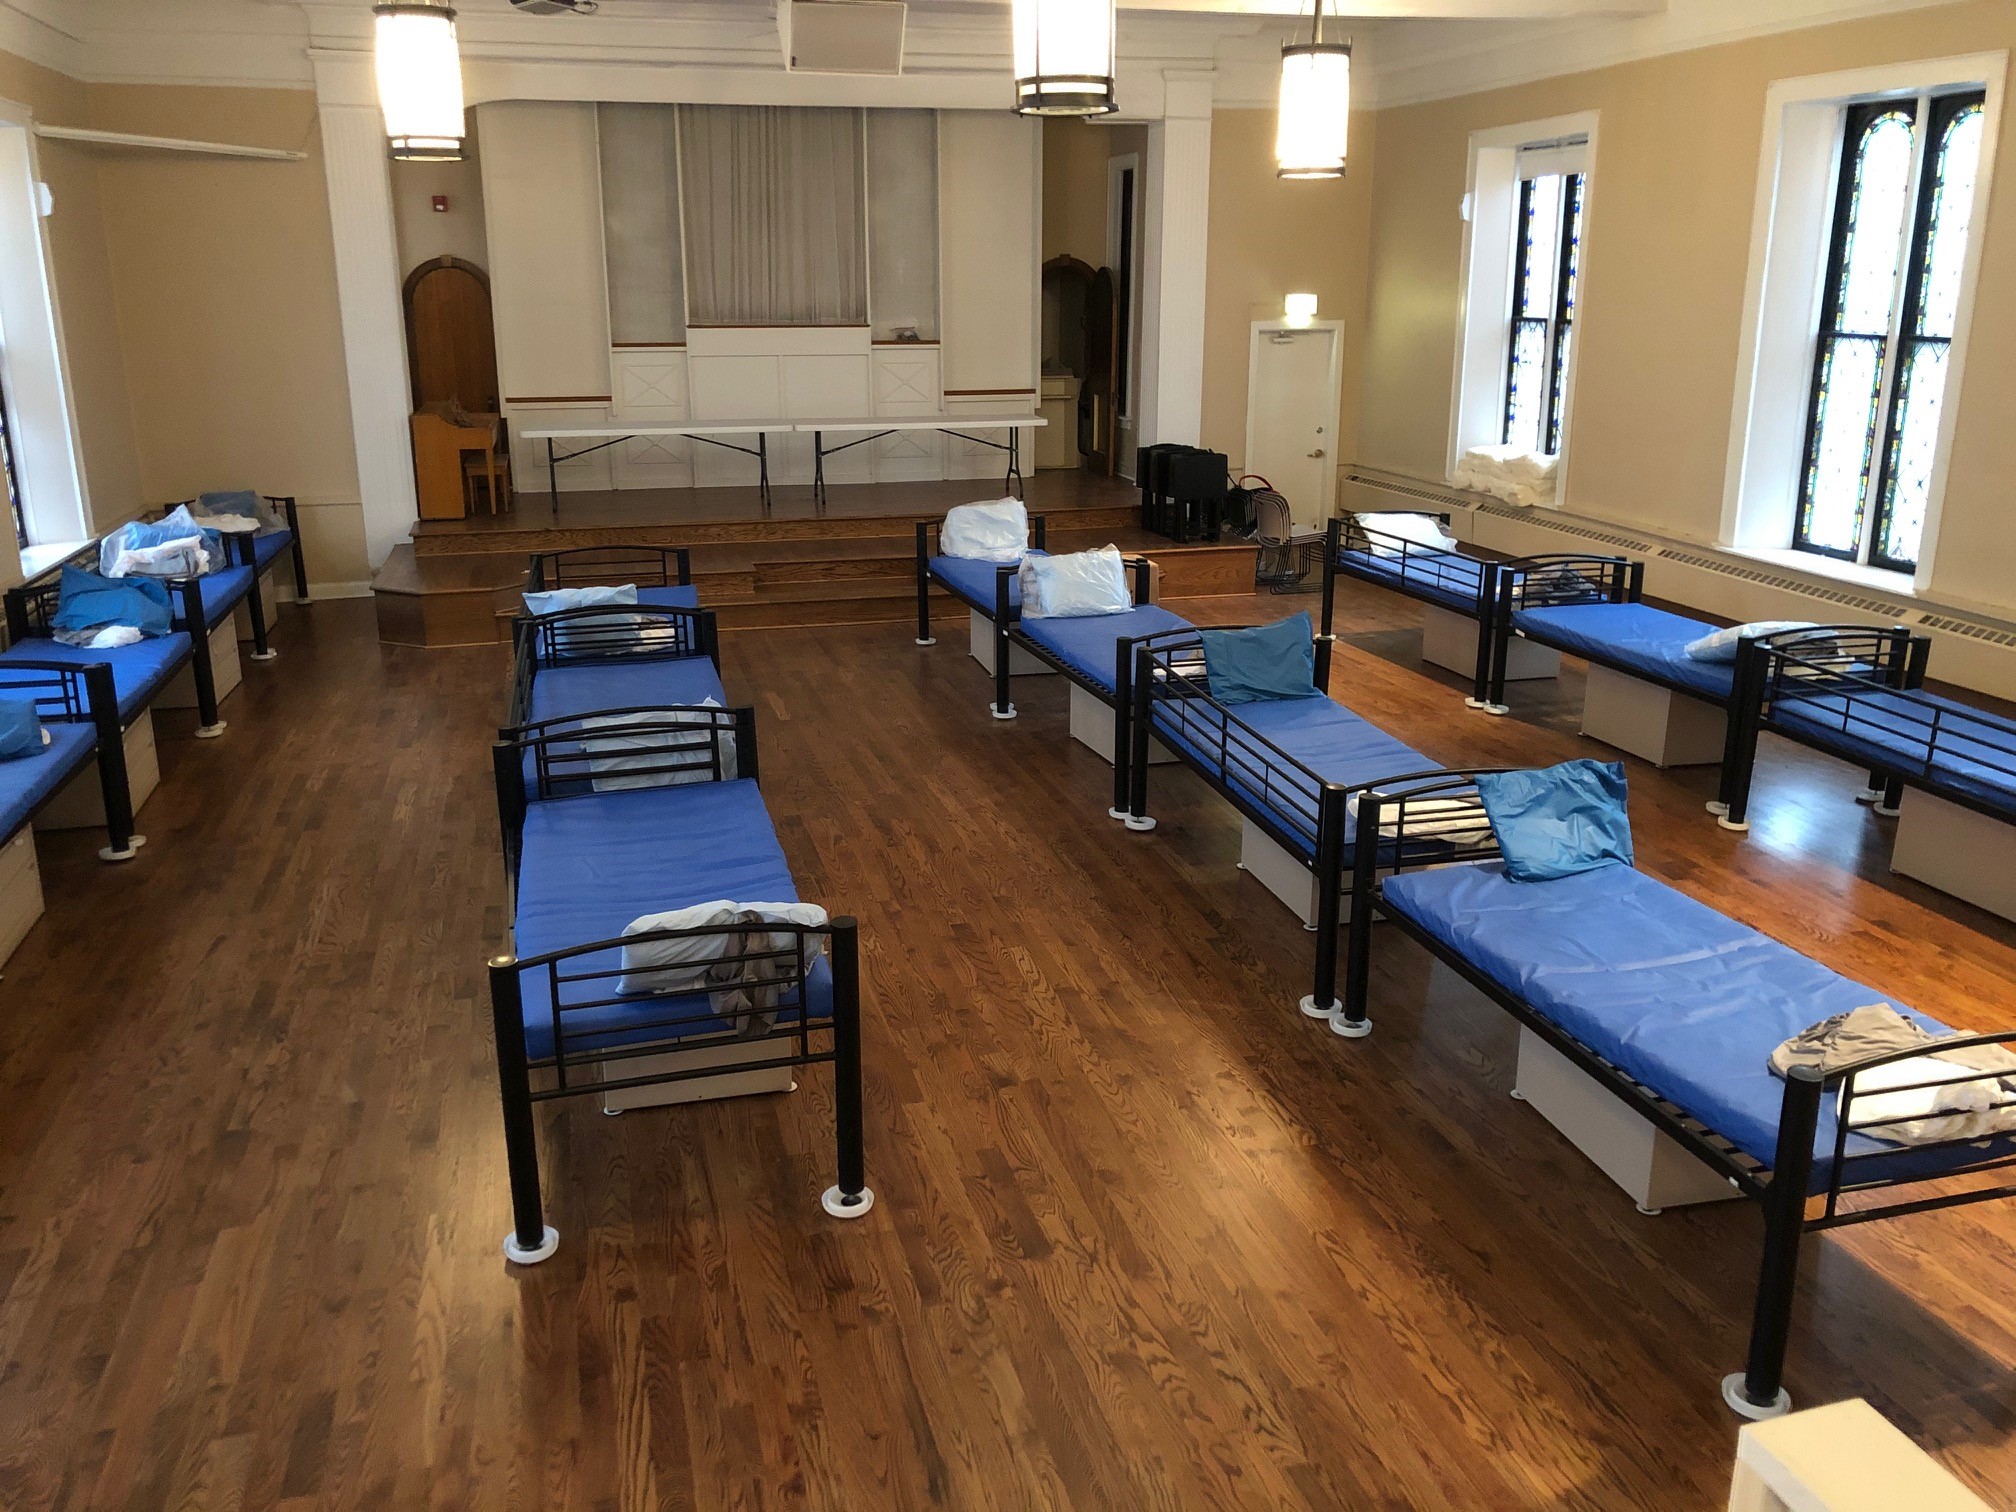 Room with evenly spaced blue cots